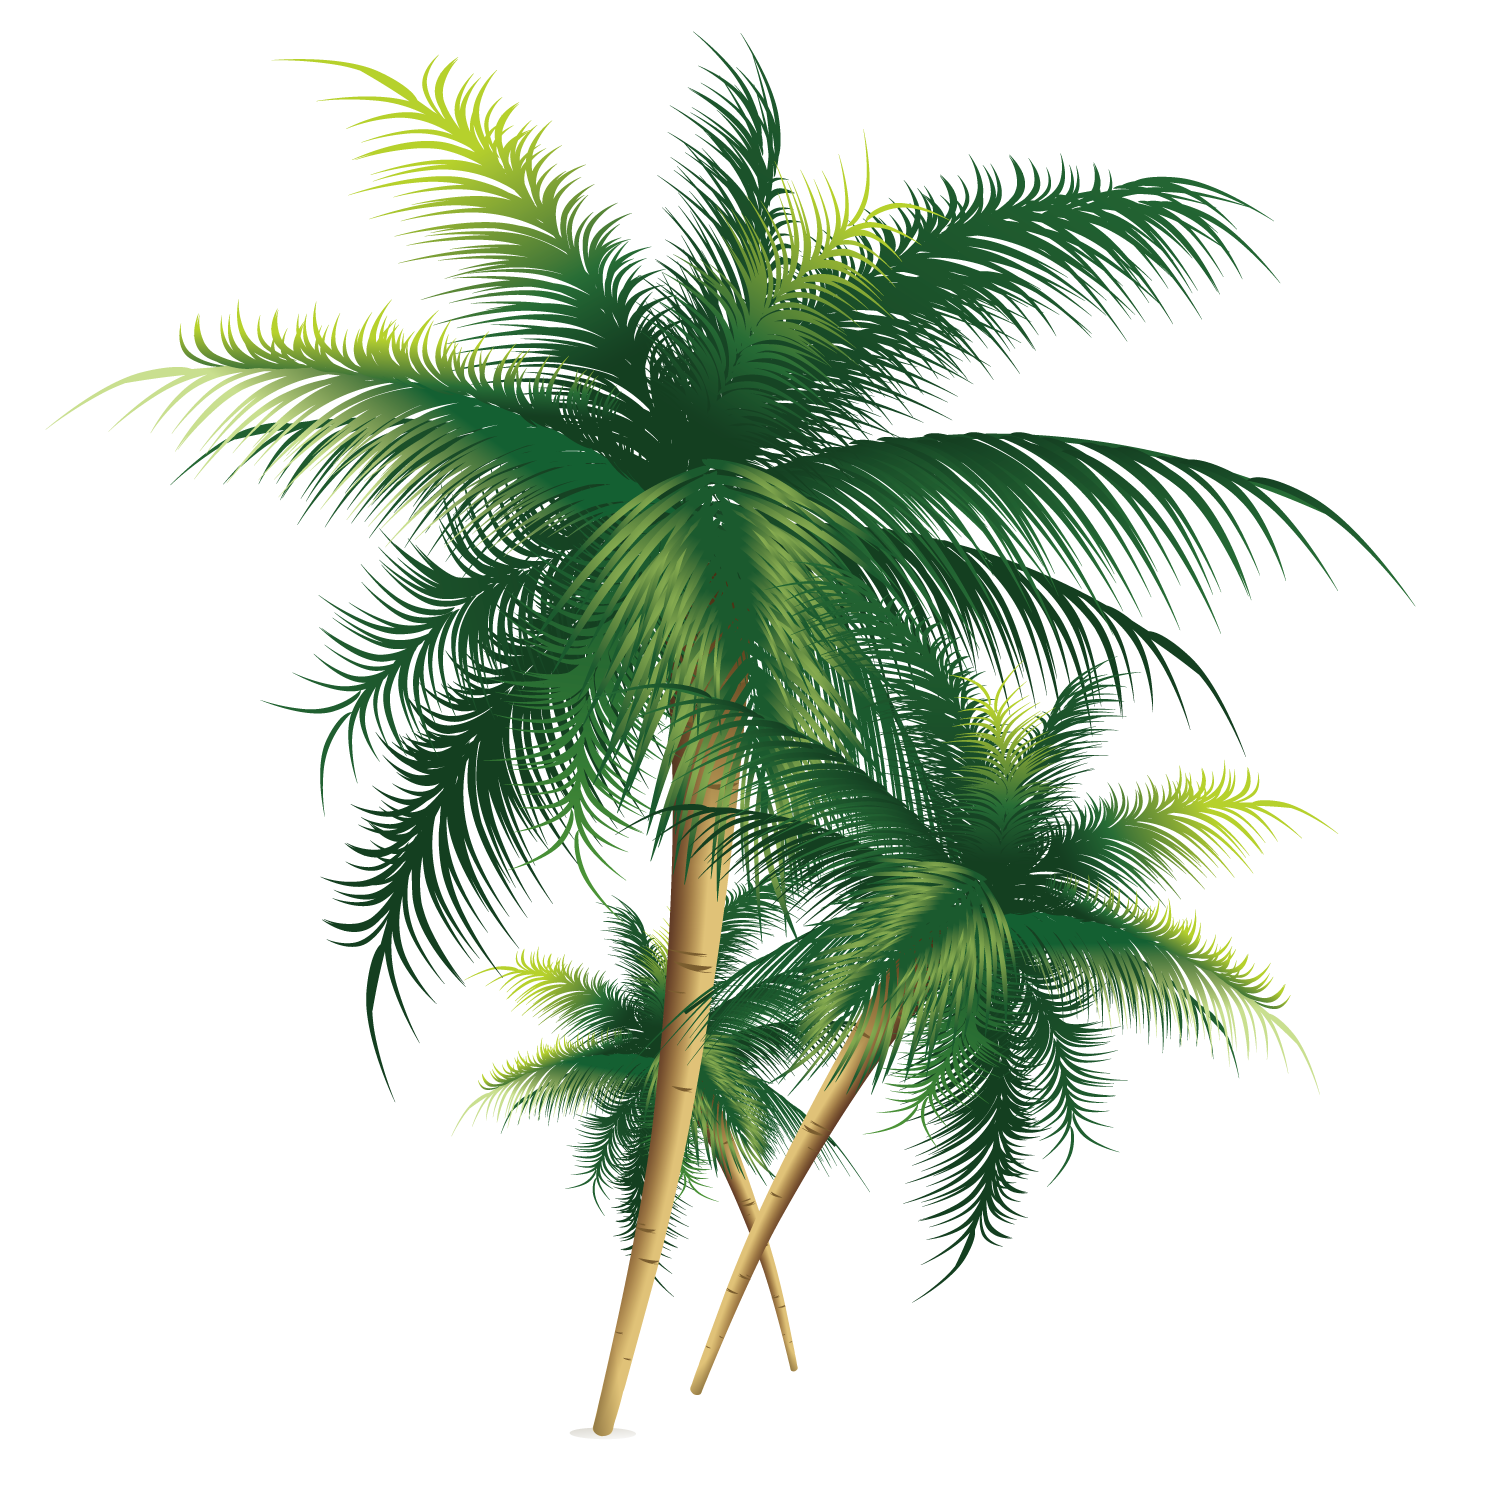 Coconut Tree Exquisite Free HD Image Clipart